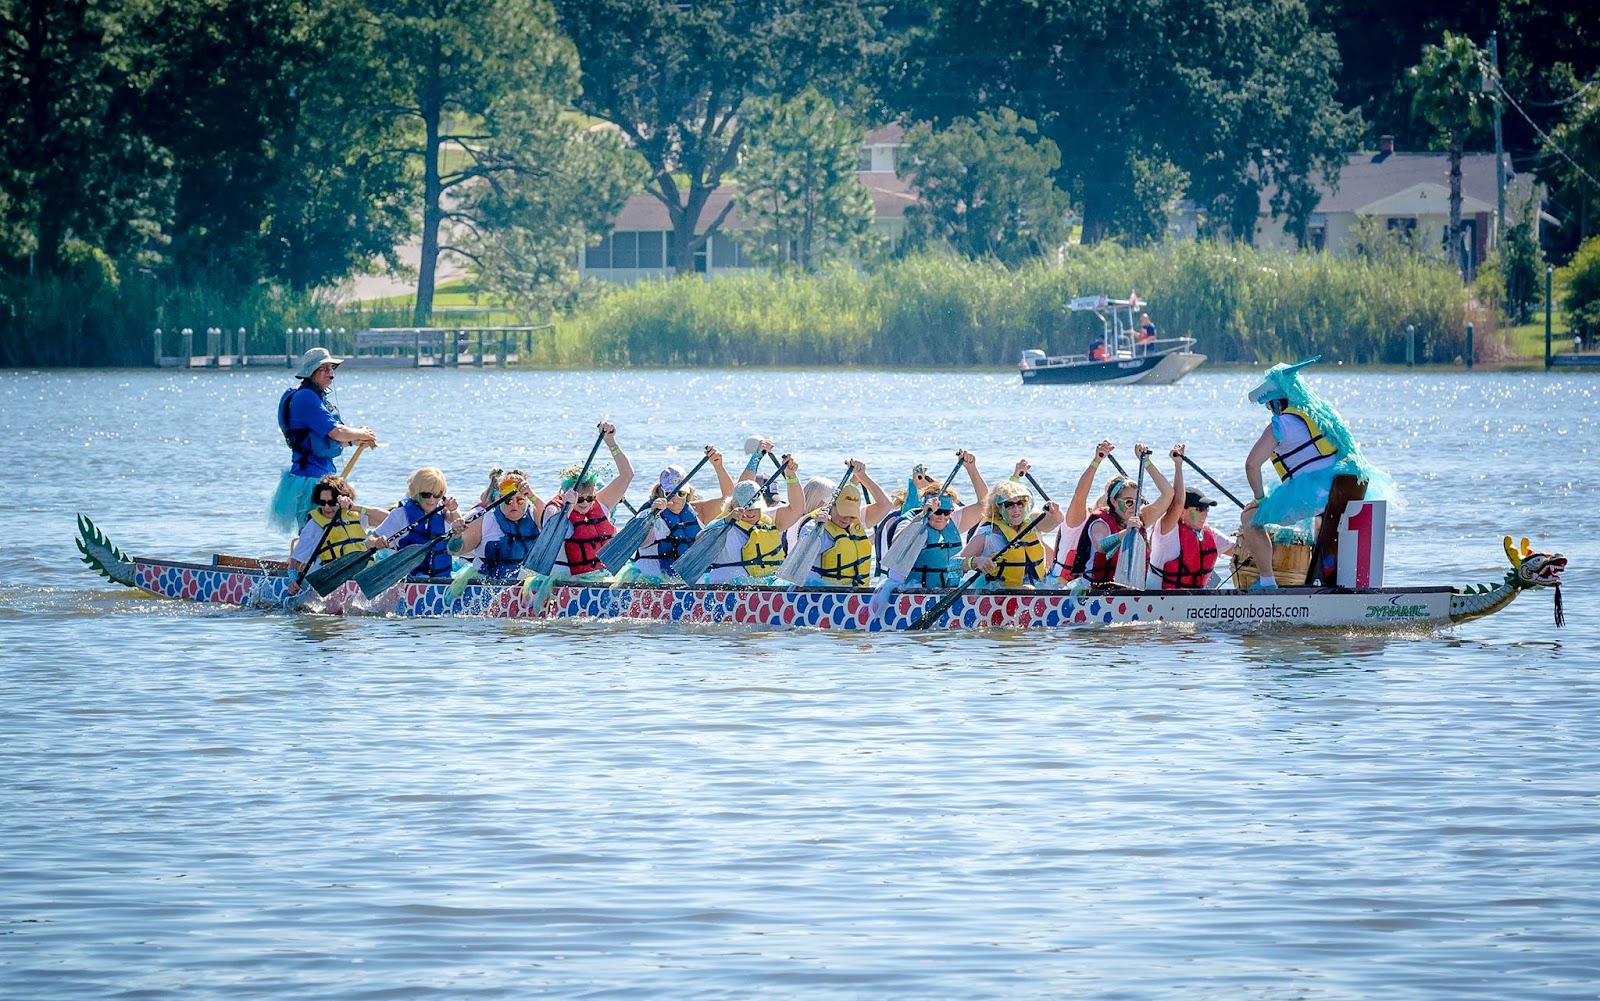 nYZYvqQysPSPYLPqzClhvXksoO hO7m P s8vYuCo 5 reasons you need to go to Birmingham’s inaugural Dragon Boat Race and Festival at East Lake Park on August 24. Admission is free!